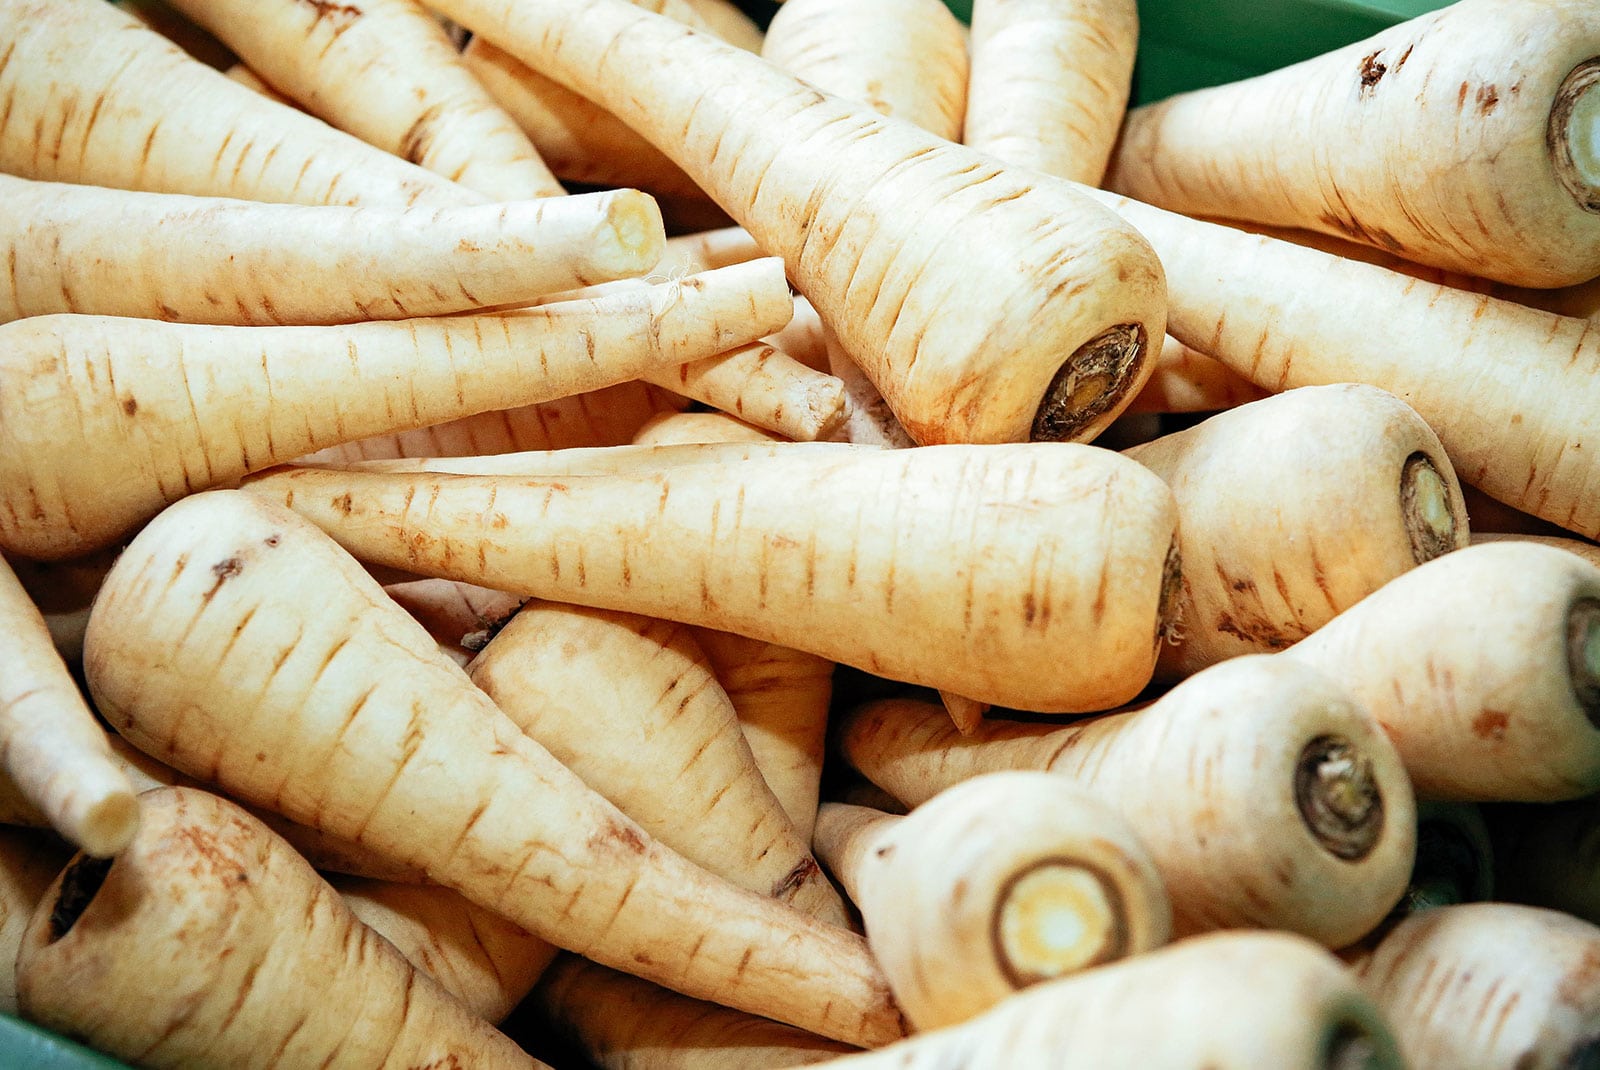 Pile of parsnips